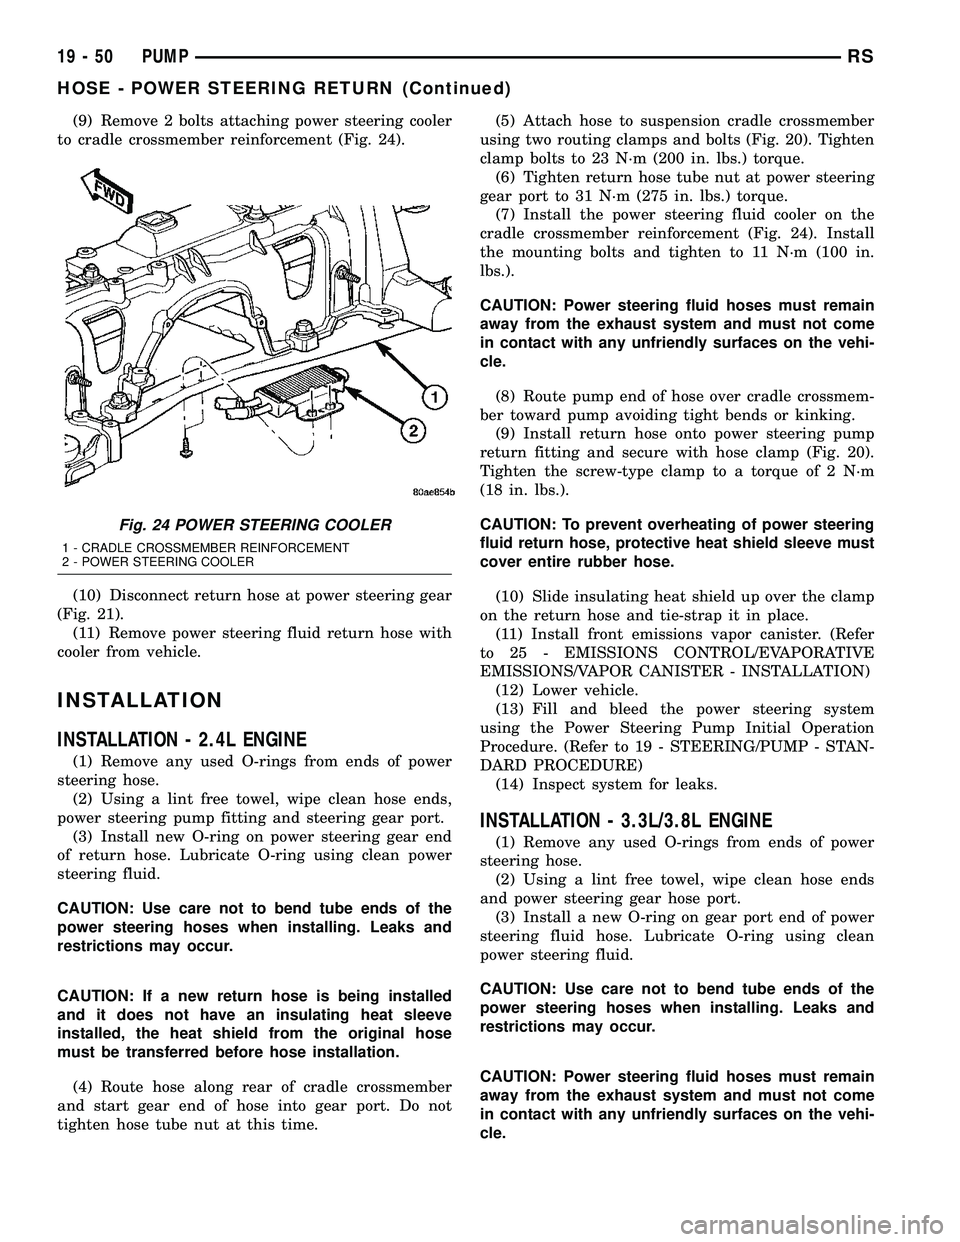 CHRYSLER VOYAGER 2005  Service Manual (9) Remove 2 bolts attaching power steering cooler
to cradle crossmember reinforcement (Fig. 24).
(10) Disconnect return hose at power steering gear
(Fig. 21).
(11) Remove power steering fluid return 